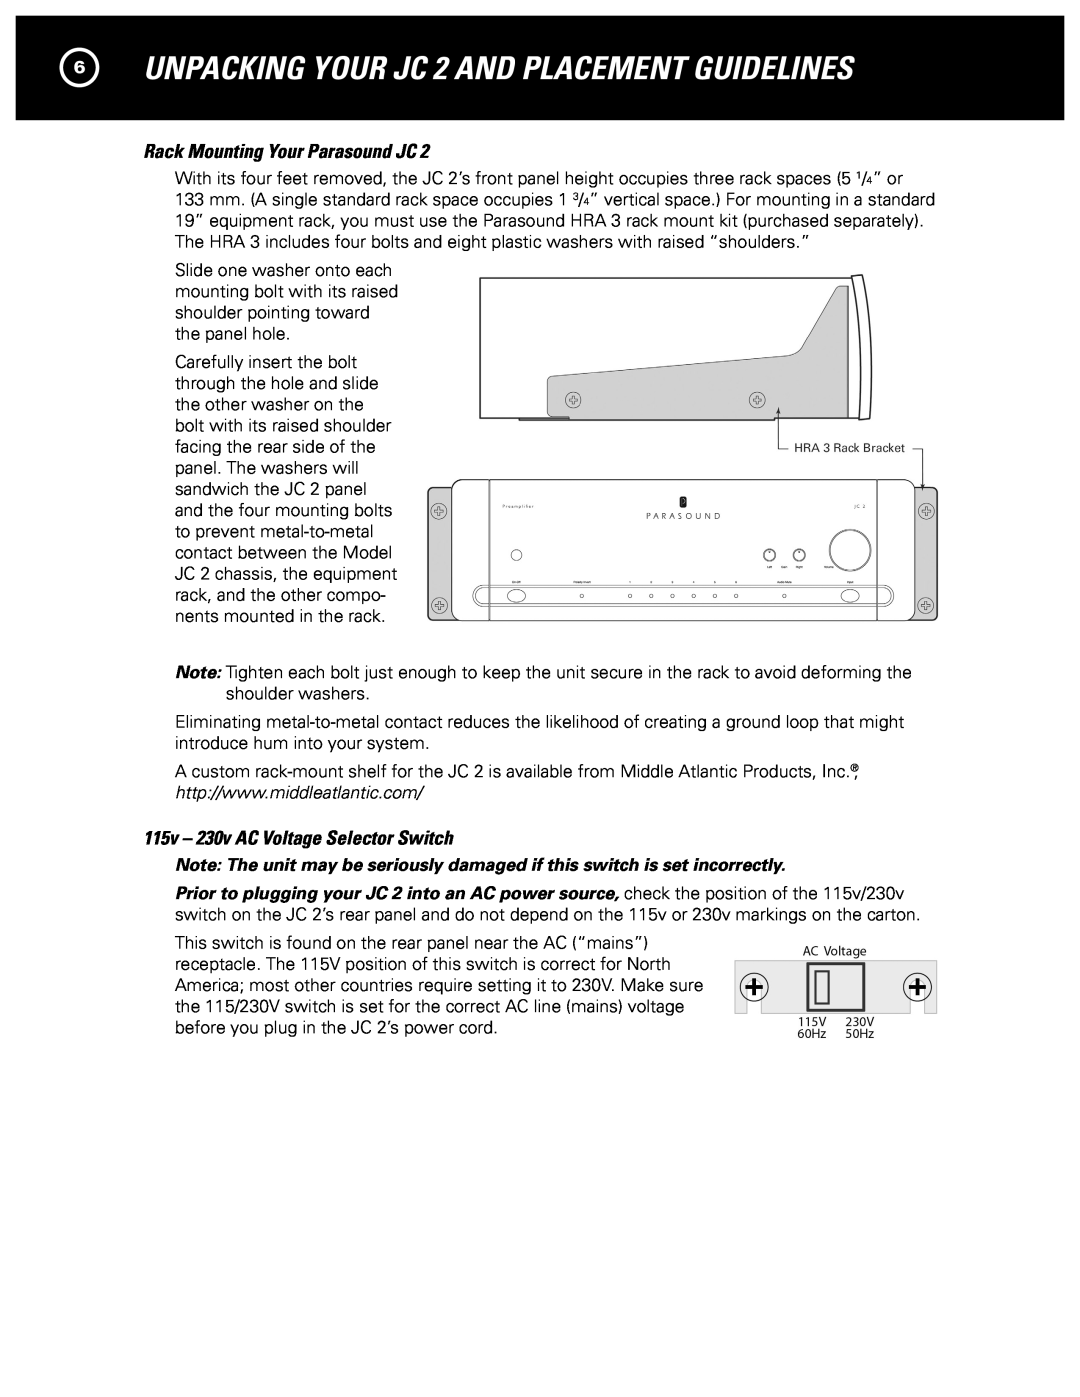 Parasound manual 6UNPACKING YOUR JC 2 AND PLACEMENT GUIDELINES, Rack Mounting Your Parasound JC 